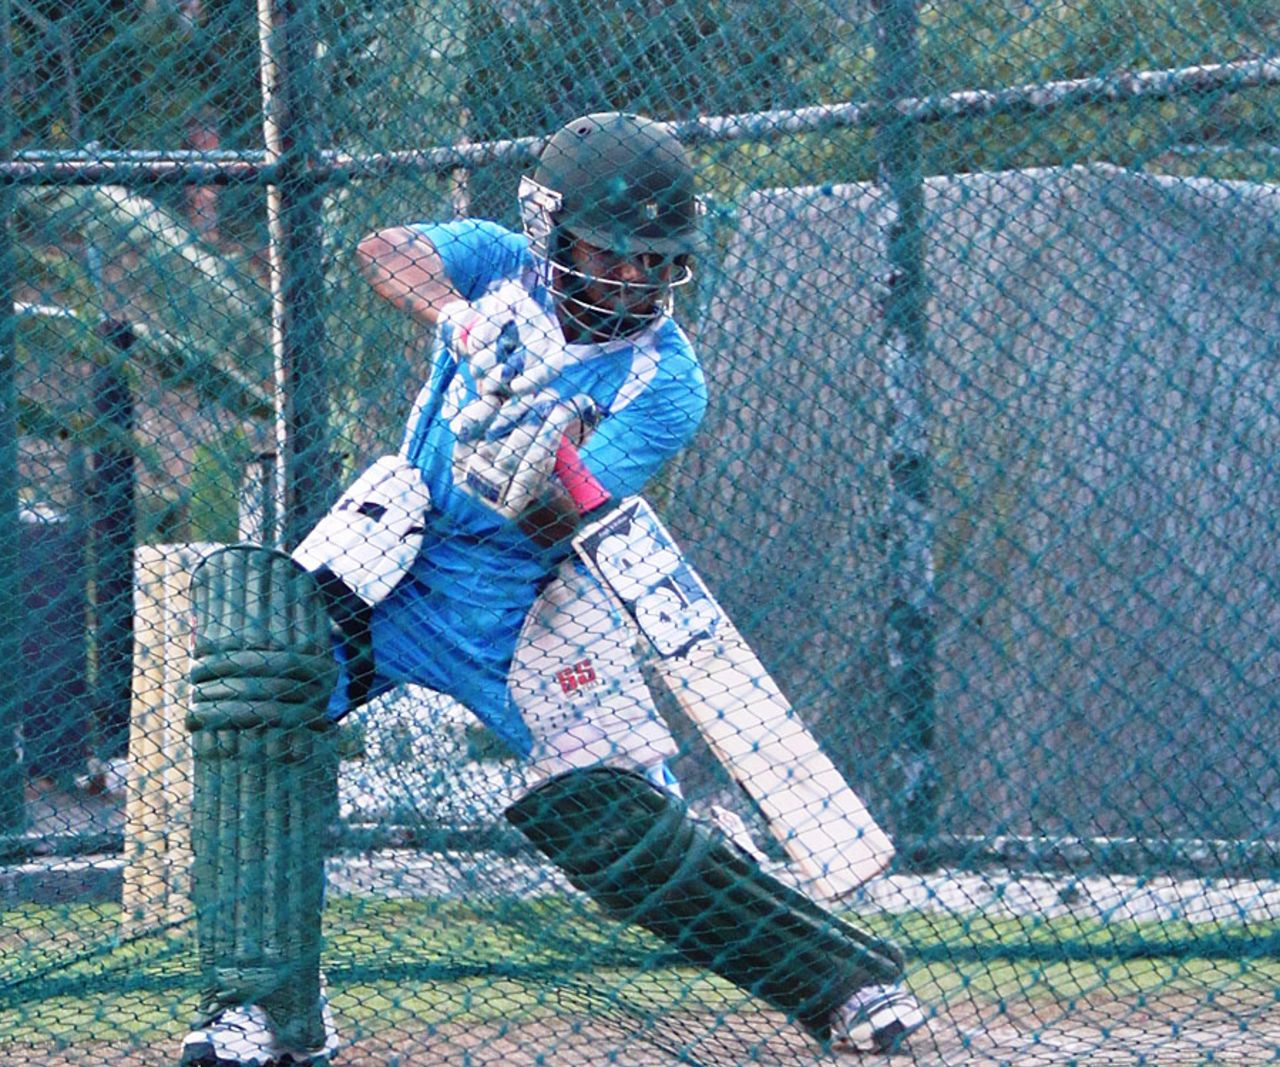 Mominul Haque plays a cut shot in the nets, Pallekele, March 30, 2013